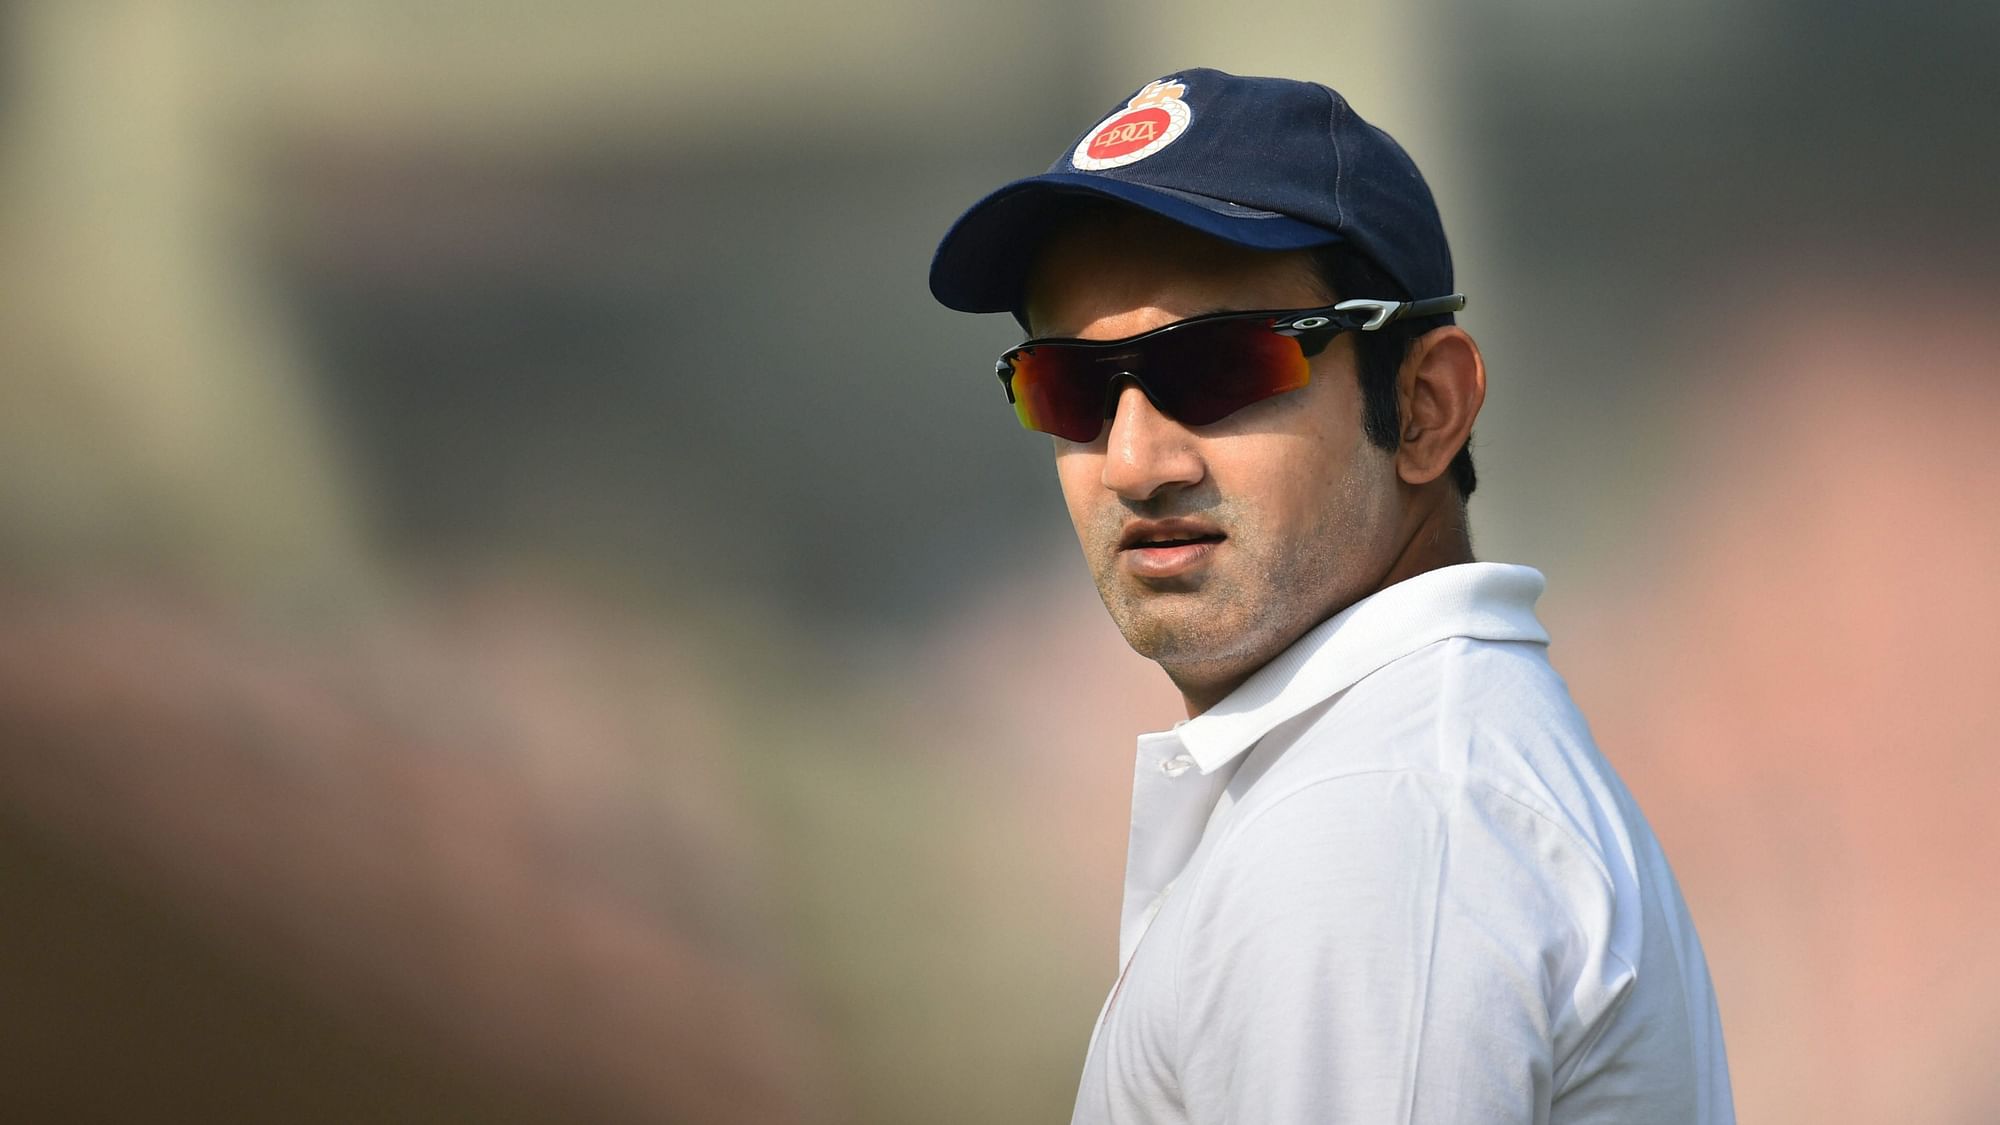 Gautam Gambhir was in the same guest panel as MSK Prasad and hit out at the former selector for his decisions.